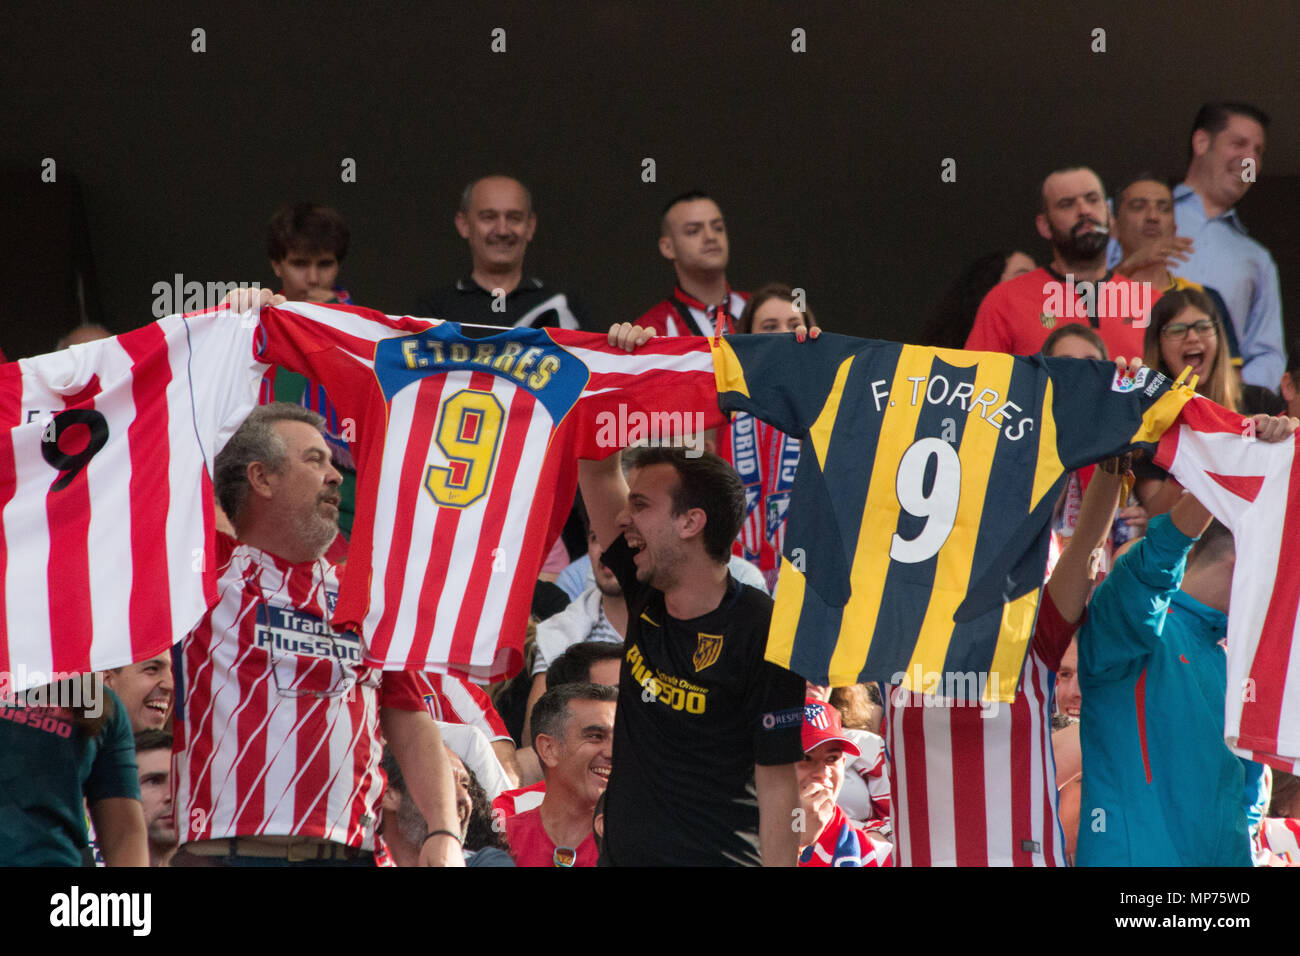 Madrid, Spain. 20th May 2018. Wanda Metropolitano stadium. Madrid. Spain. More than 68.000 people comes to see the 38th seasson of La Liga and the retire of Fernando Torres Idol of the club. The match confront Atletico de Madrid v Eibar S.D. Fernando Torres T-Shirts. Credit: Jorge Gonzalez /Alamy Live News/Alamy Live News Stock Photo